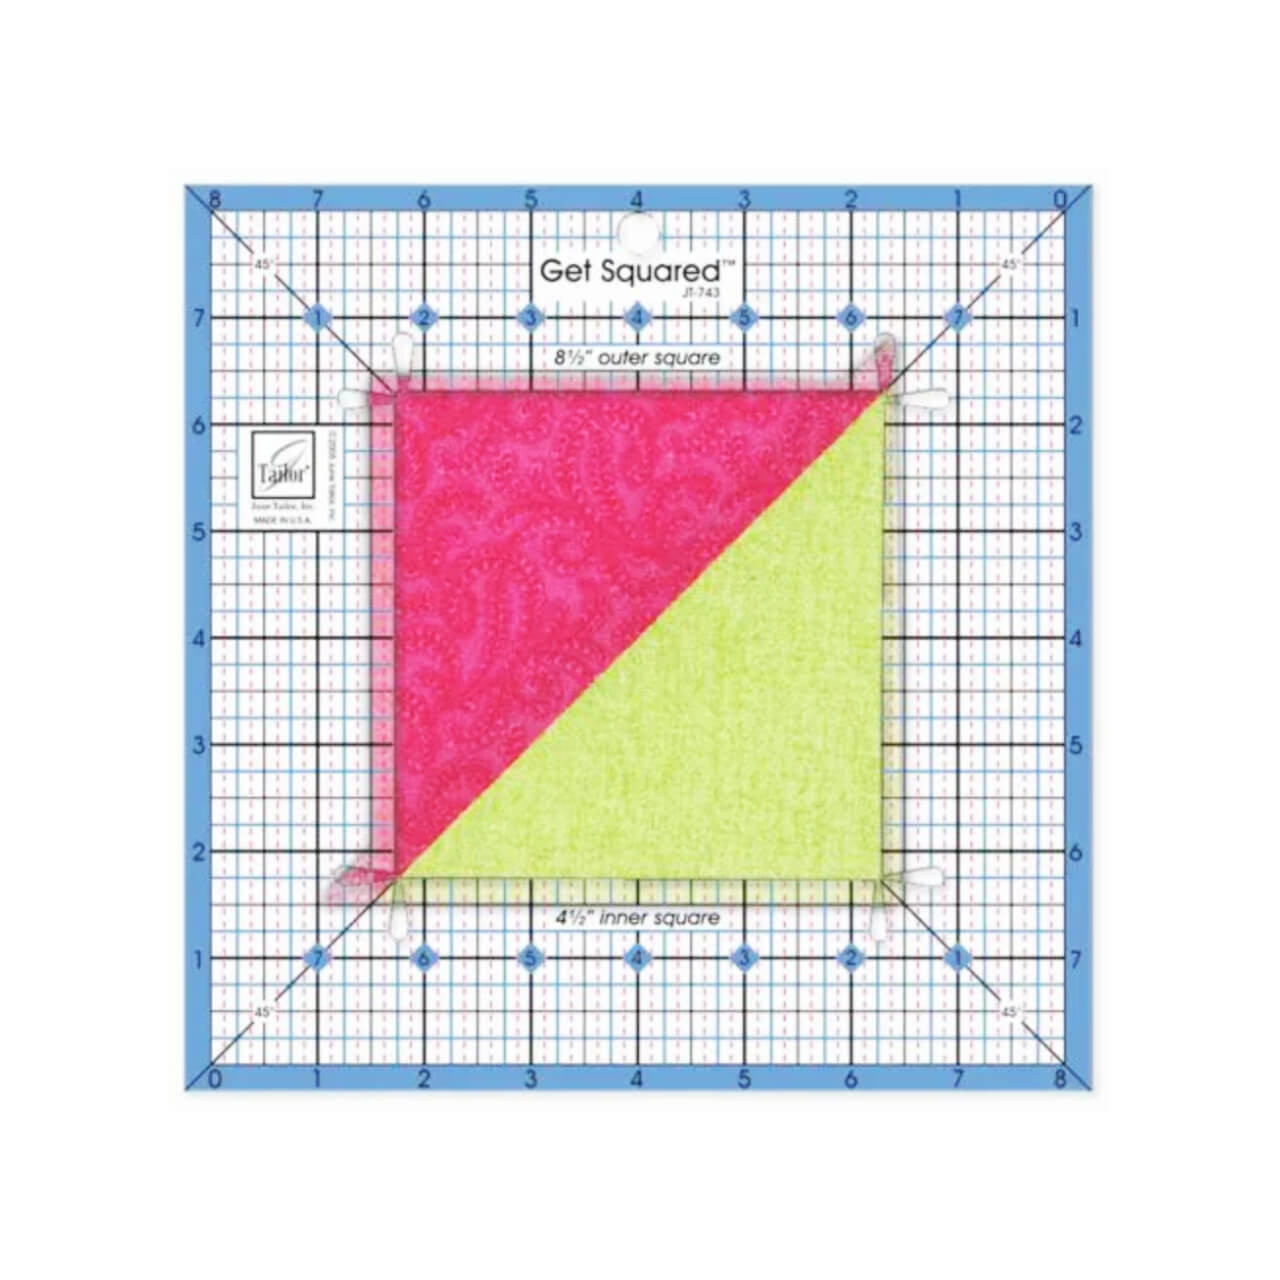 The Medium Get Squared Ruler by June Tailor in use, placed over a diagonally split pink and green fabric square, showing how it helps measure and trim quilt blocks to the precise size.